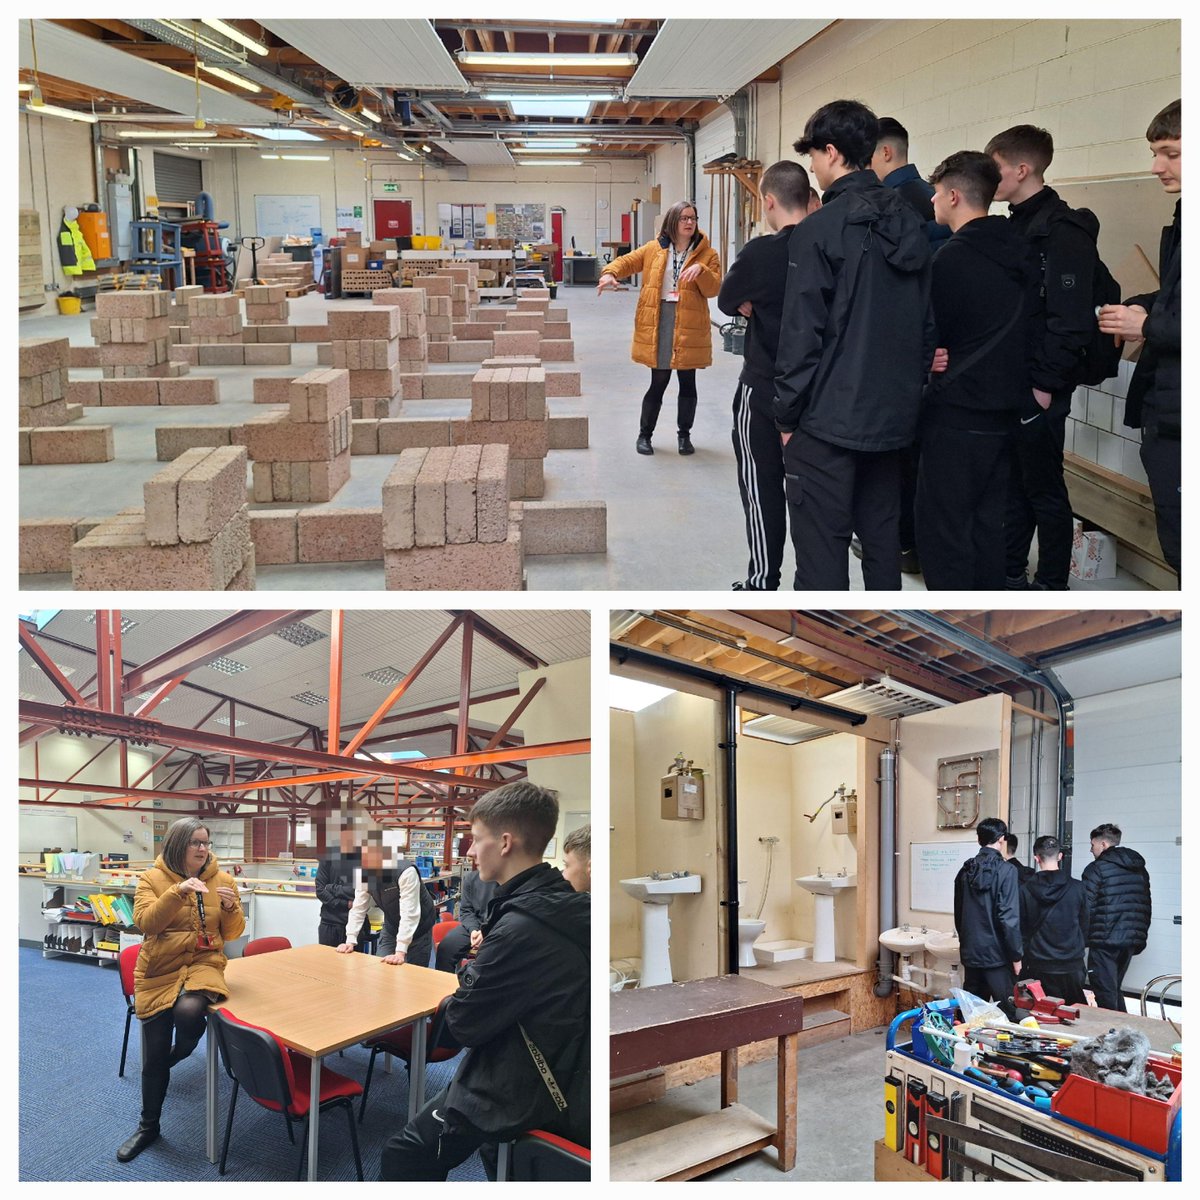 Thanks to DYW & the organisations that supported the Perth Apprenticeship Jobs Fair. Our pupils were able to talk to employers about a range of exciting opportunities. Thanks also to UHI Perth for the excellent tour of their departments and facilities.@DYWTayCities @UHIPerth_